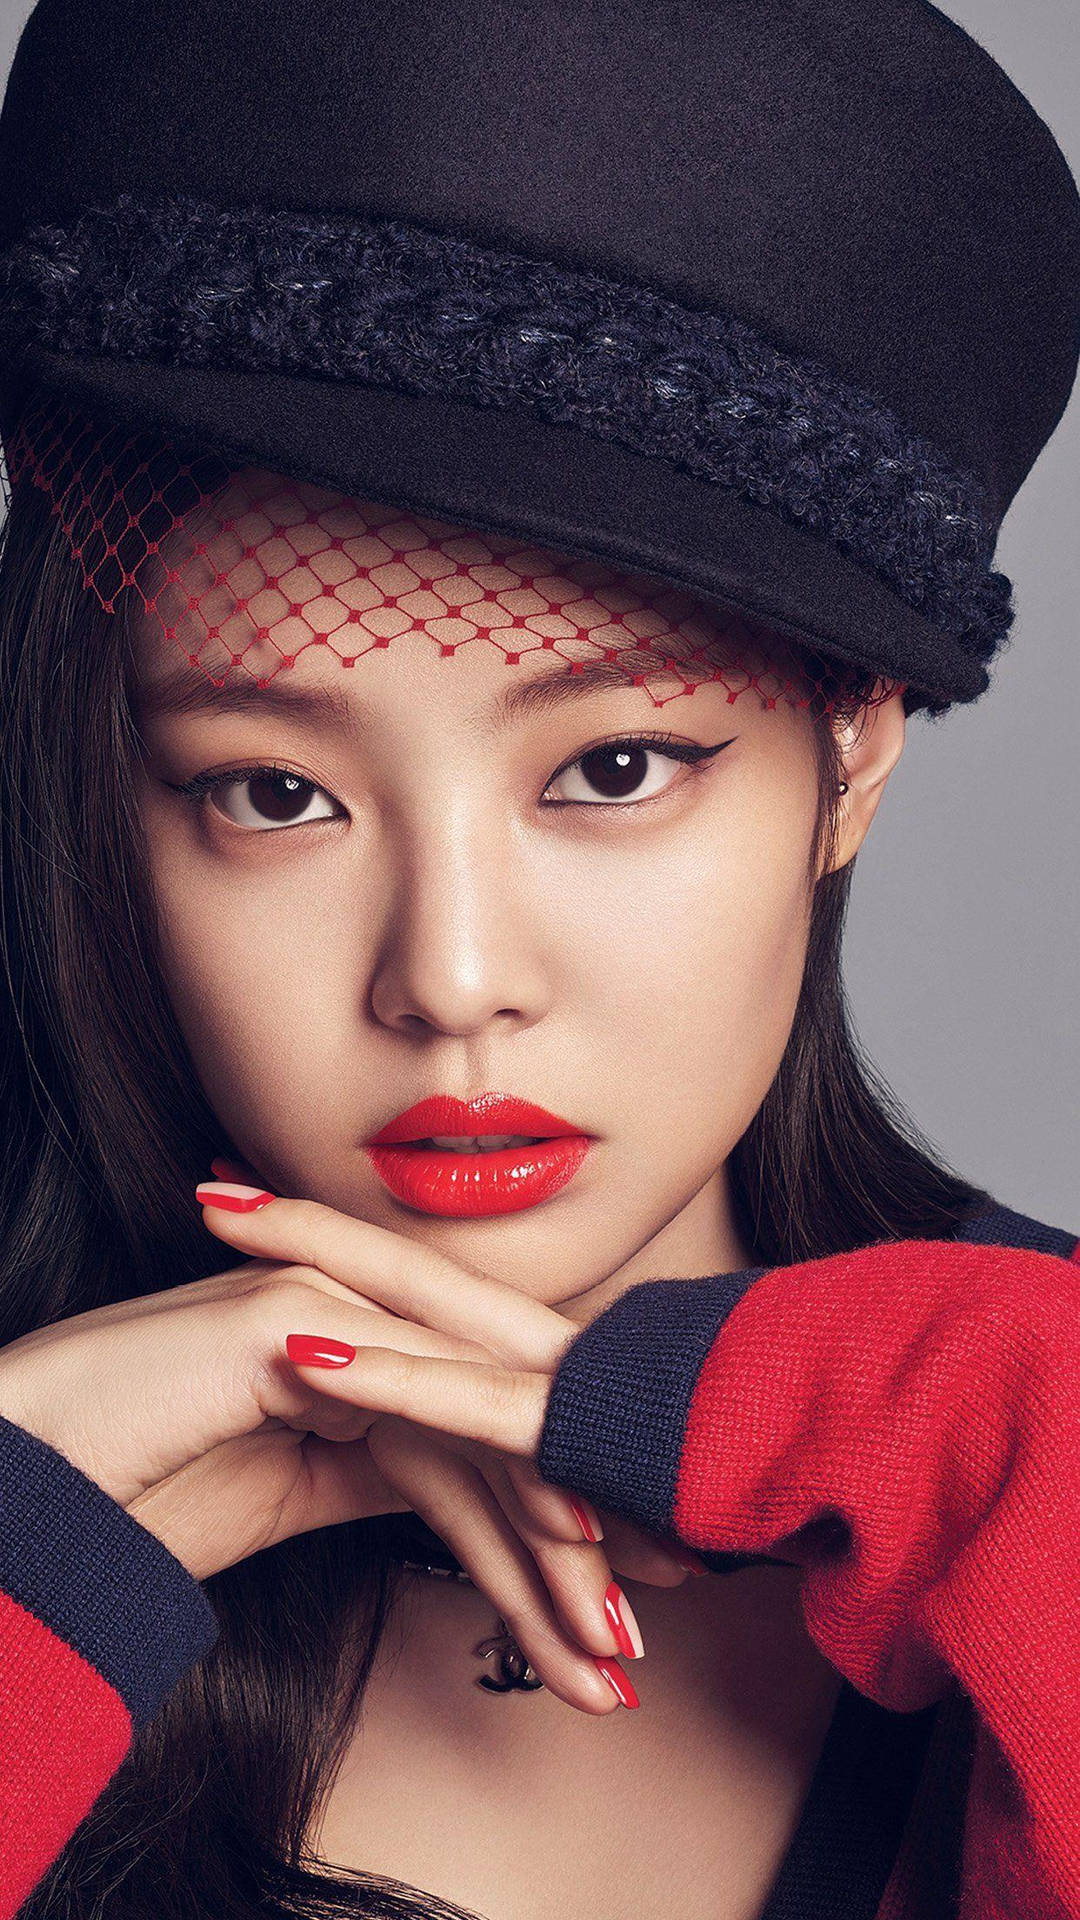 Jennie In Red Coat Background